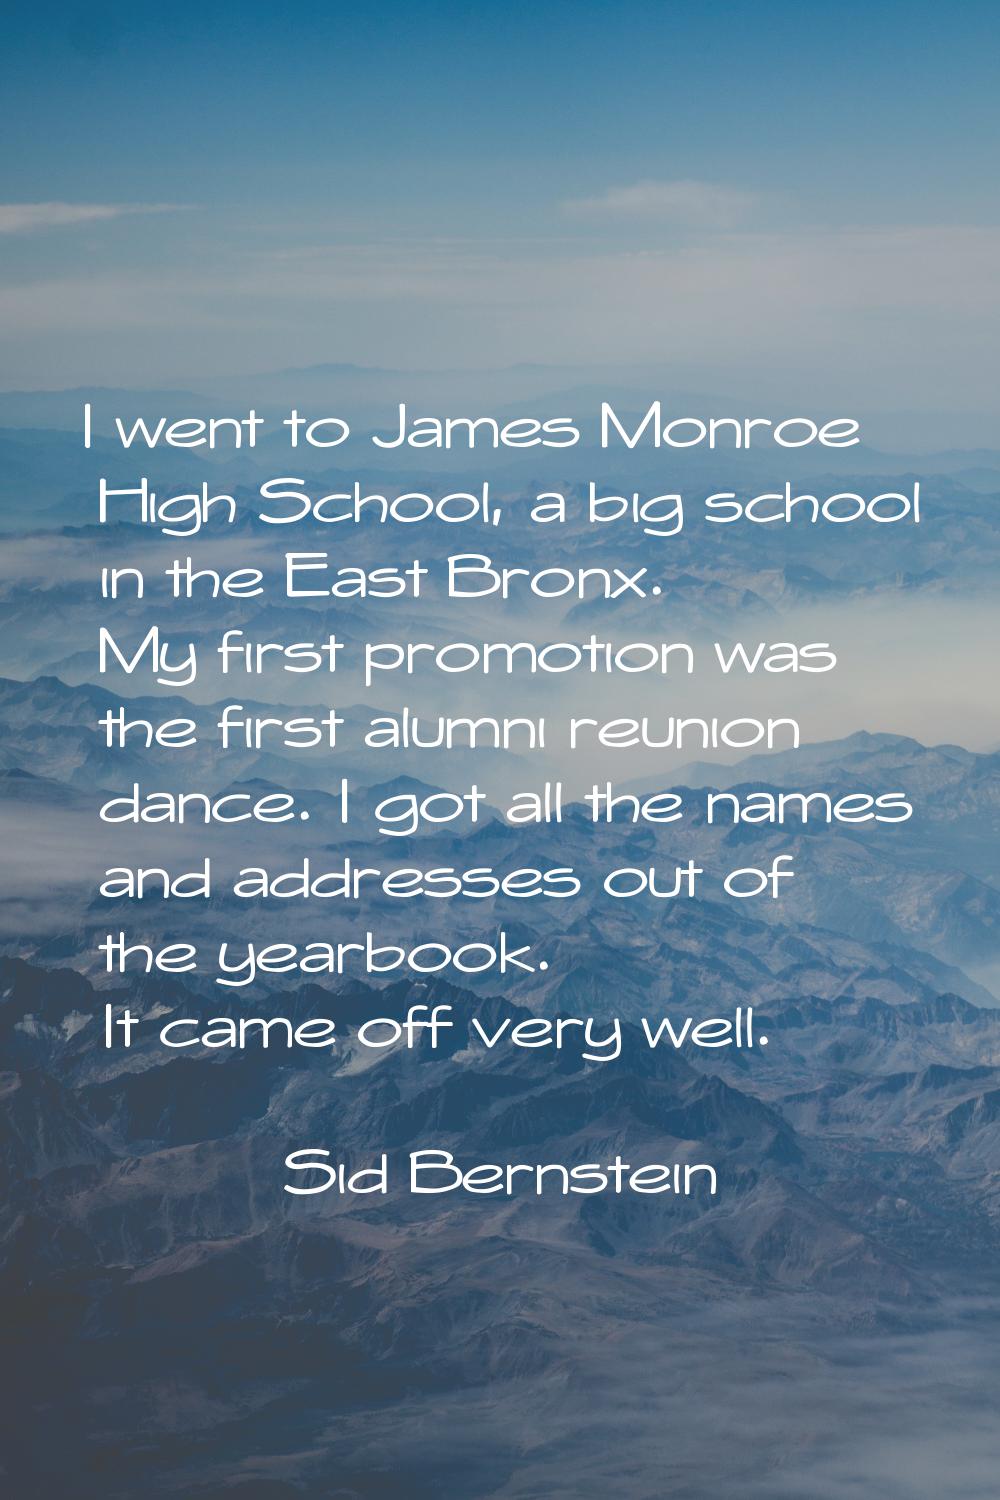 I went to James Monroe High School, a big school in the East Bronx. My first promotion was the firs